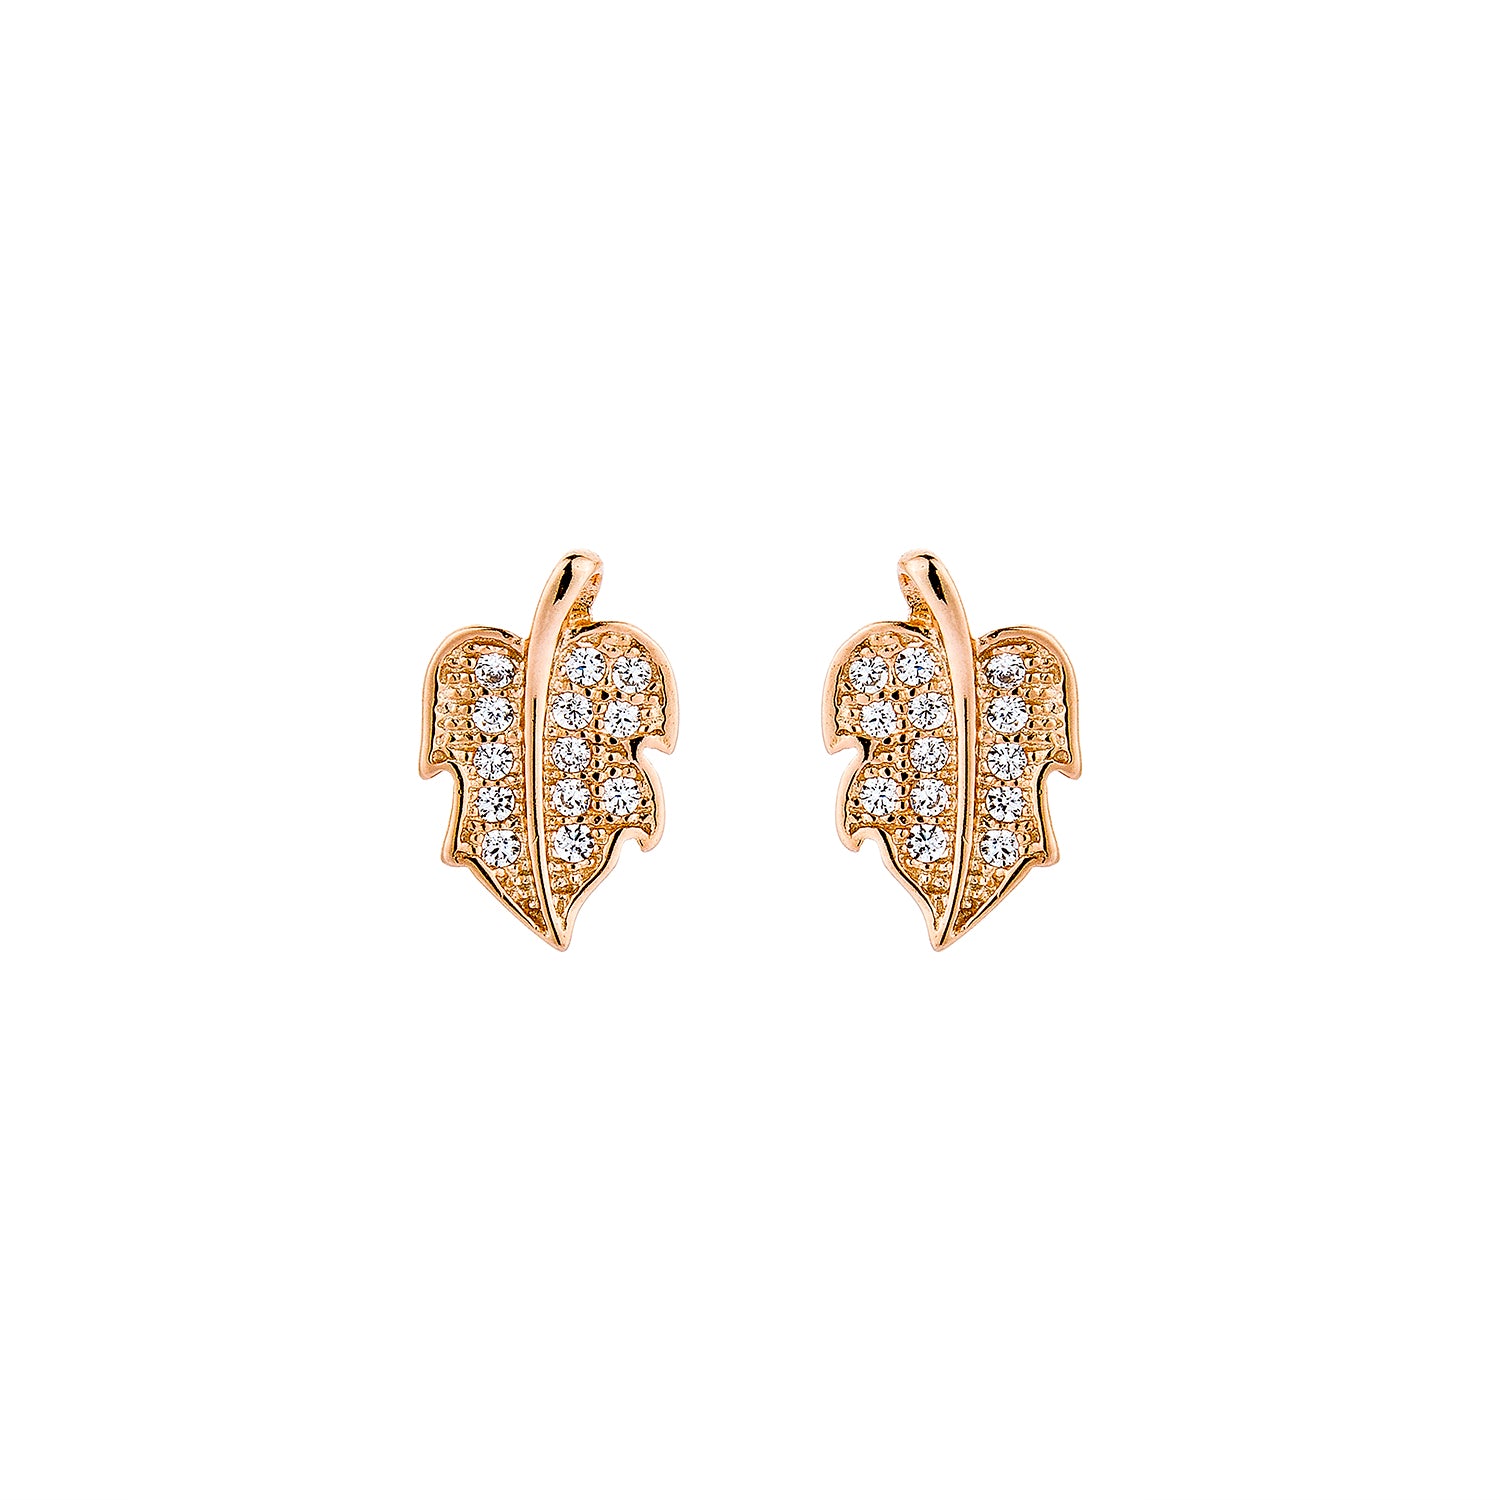 Leaf Earrings - Gold with White CZ